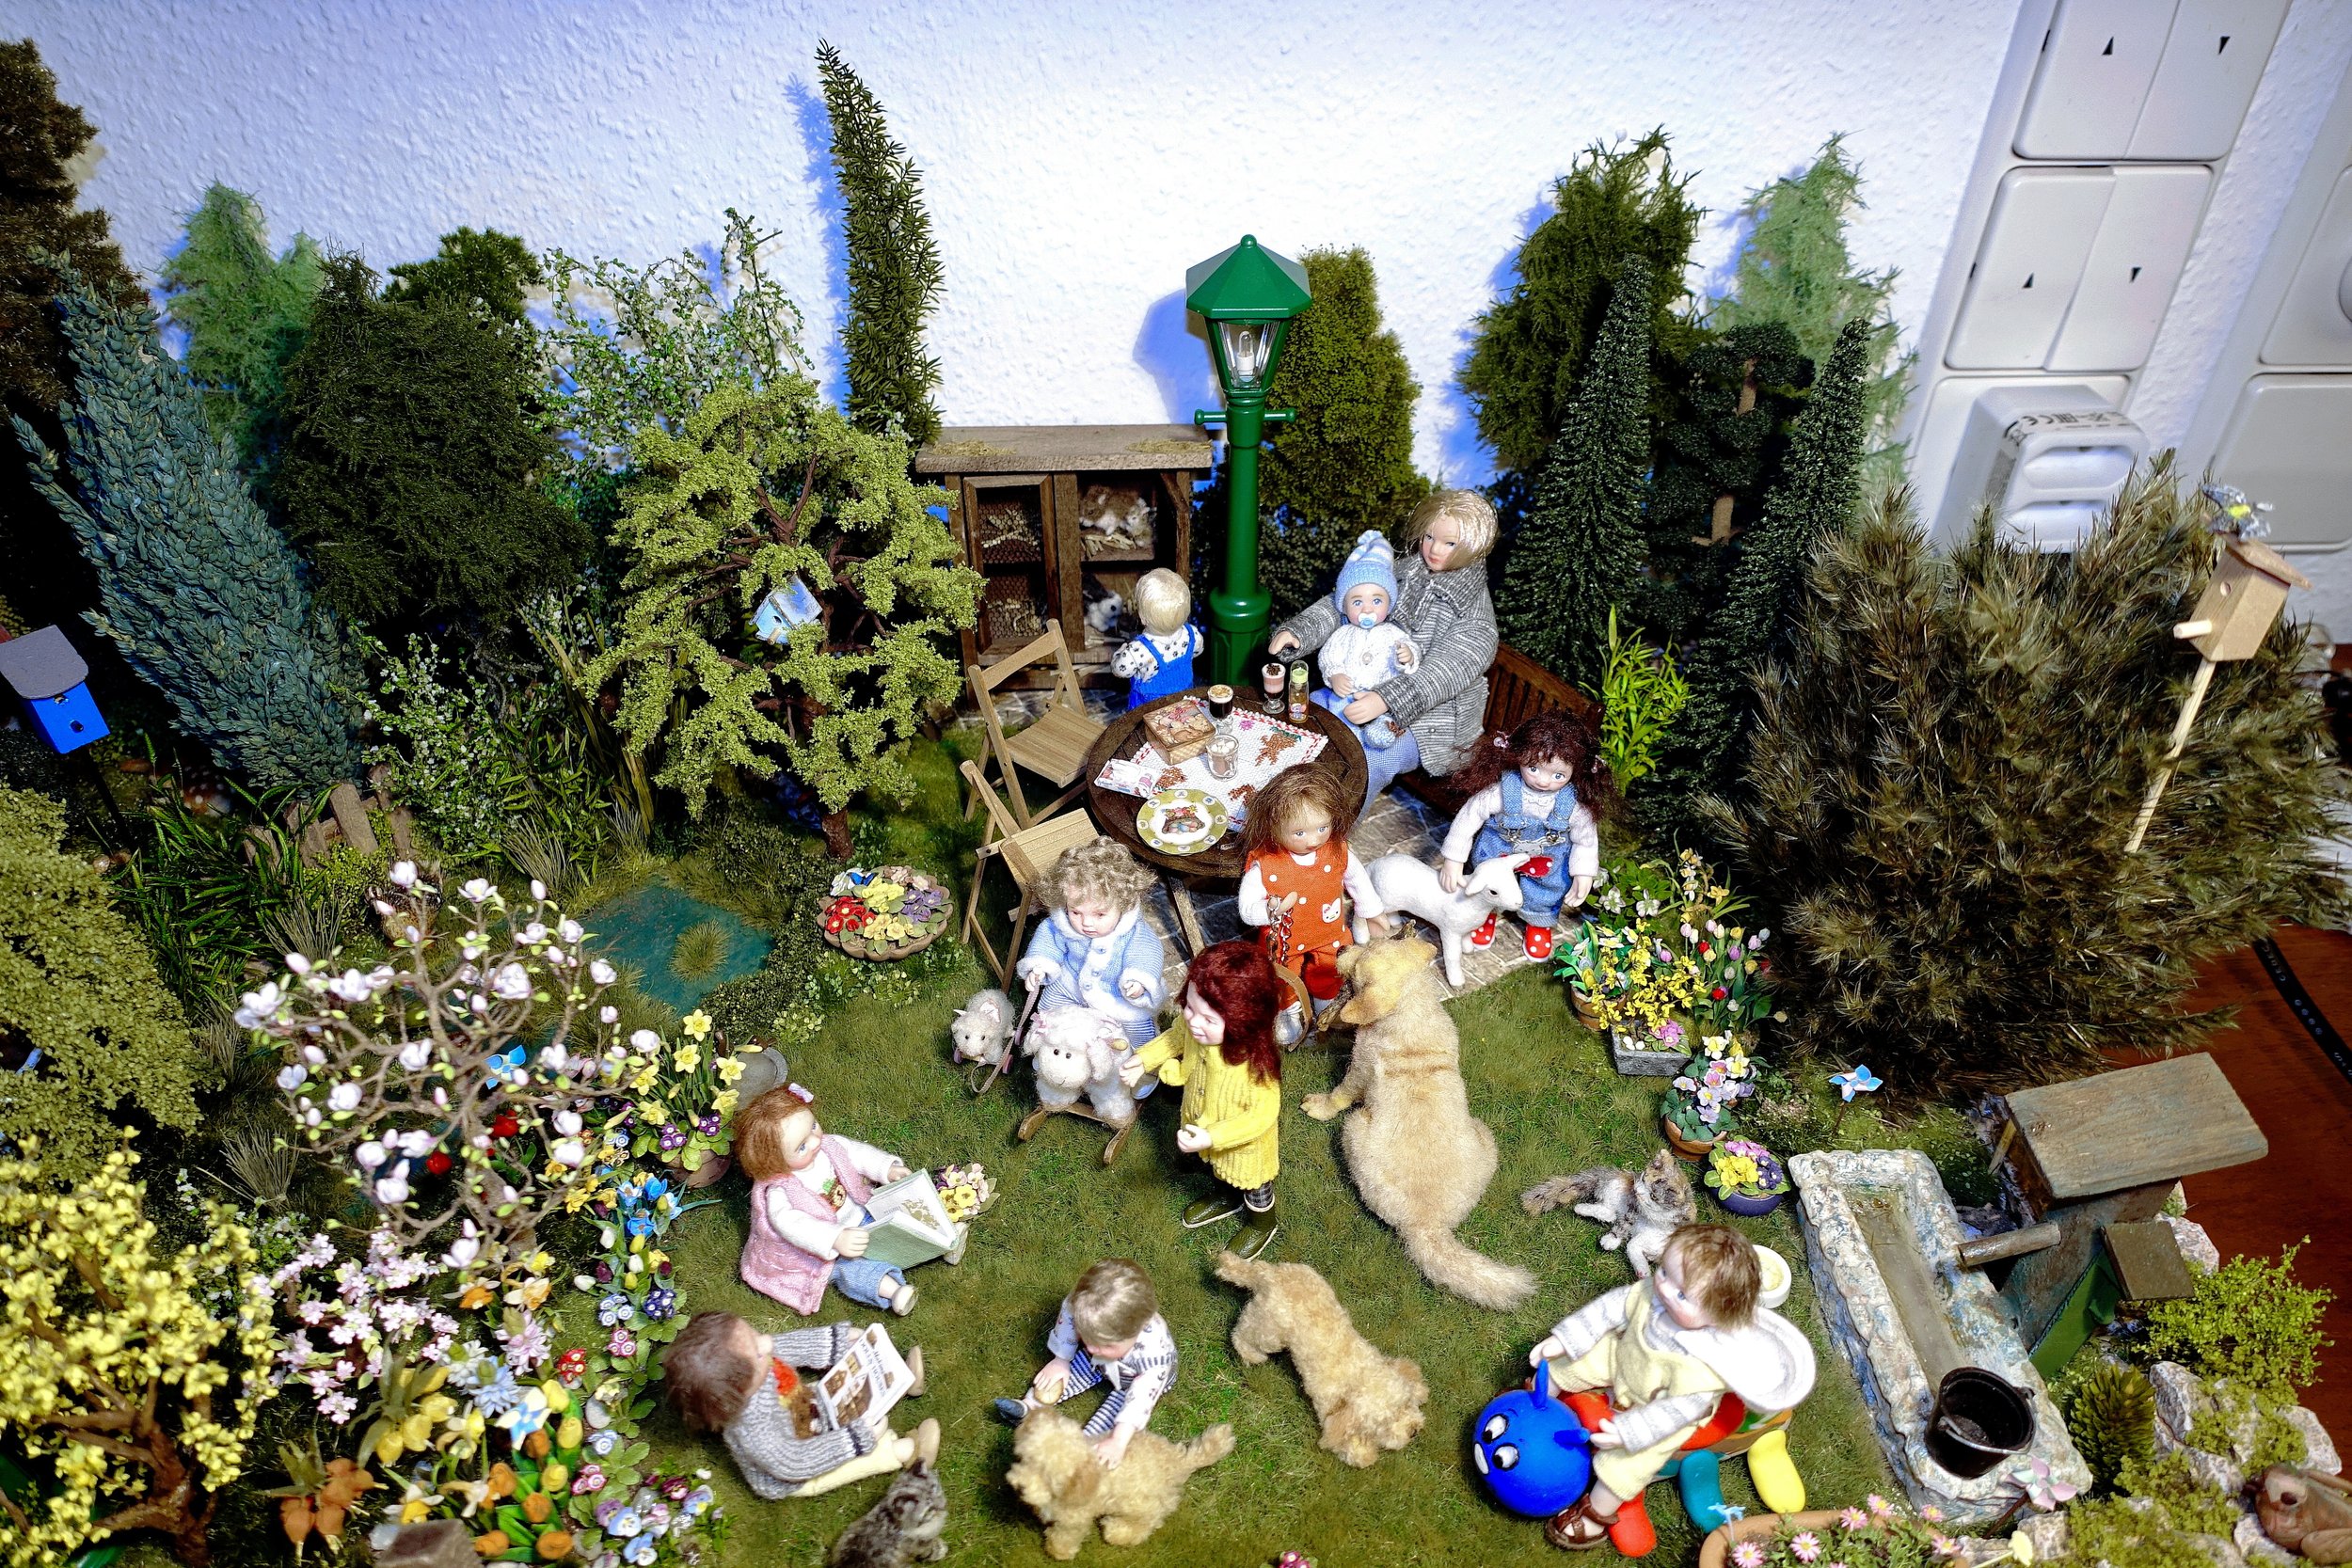  The folding chairs provide extra seating in Margit’s wonderfully detailed springtime diorama.  